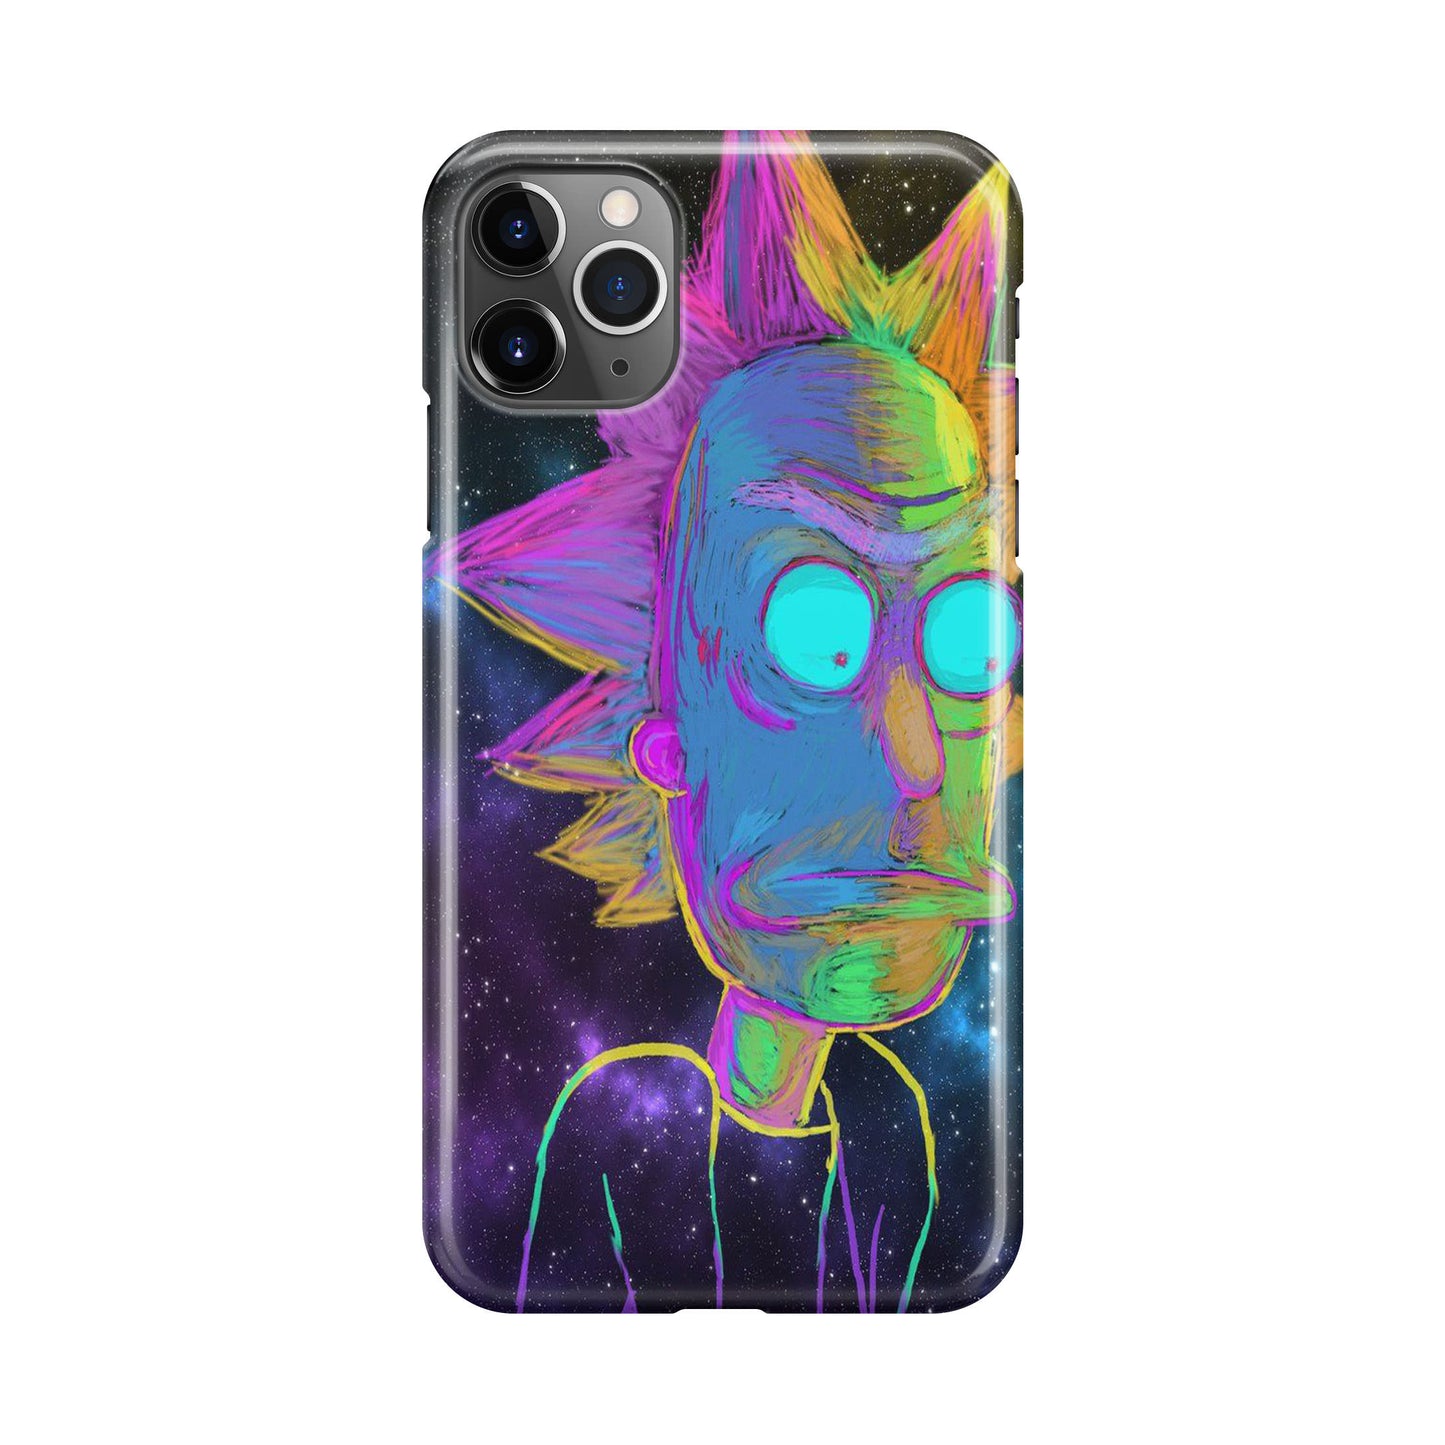 Rick Colorful Crayon Space iPhone 11 Pro Max Case